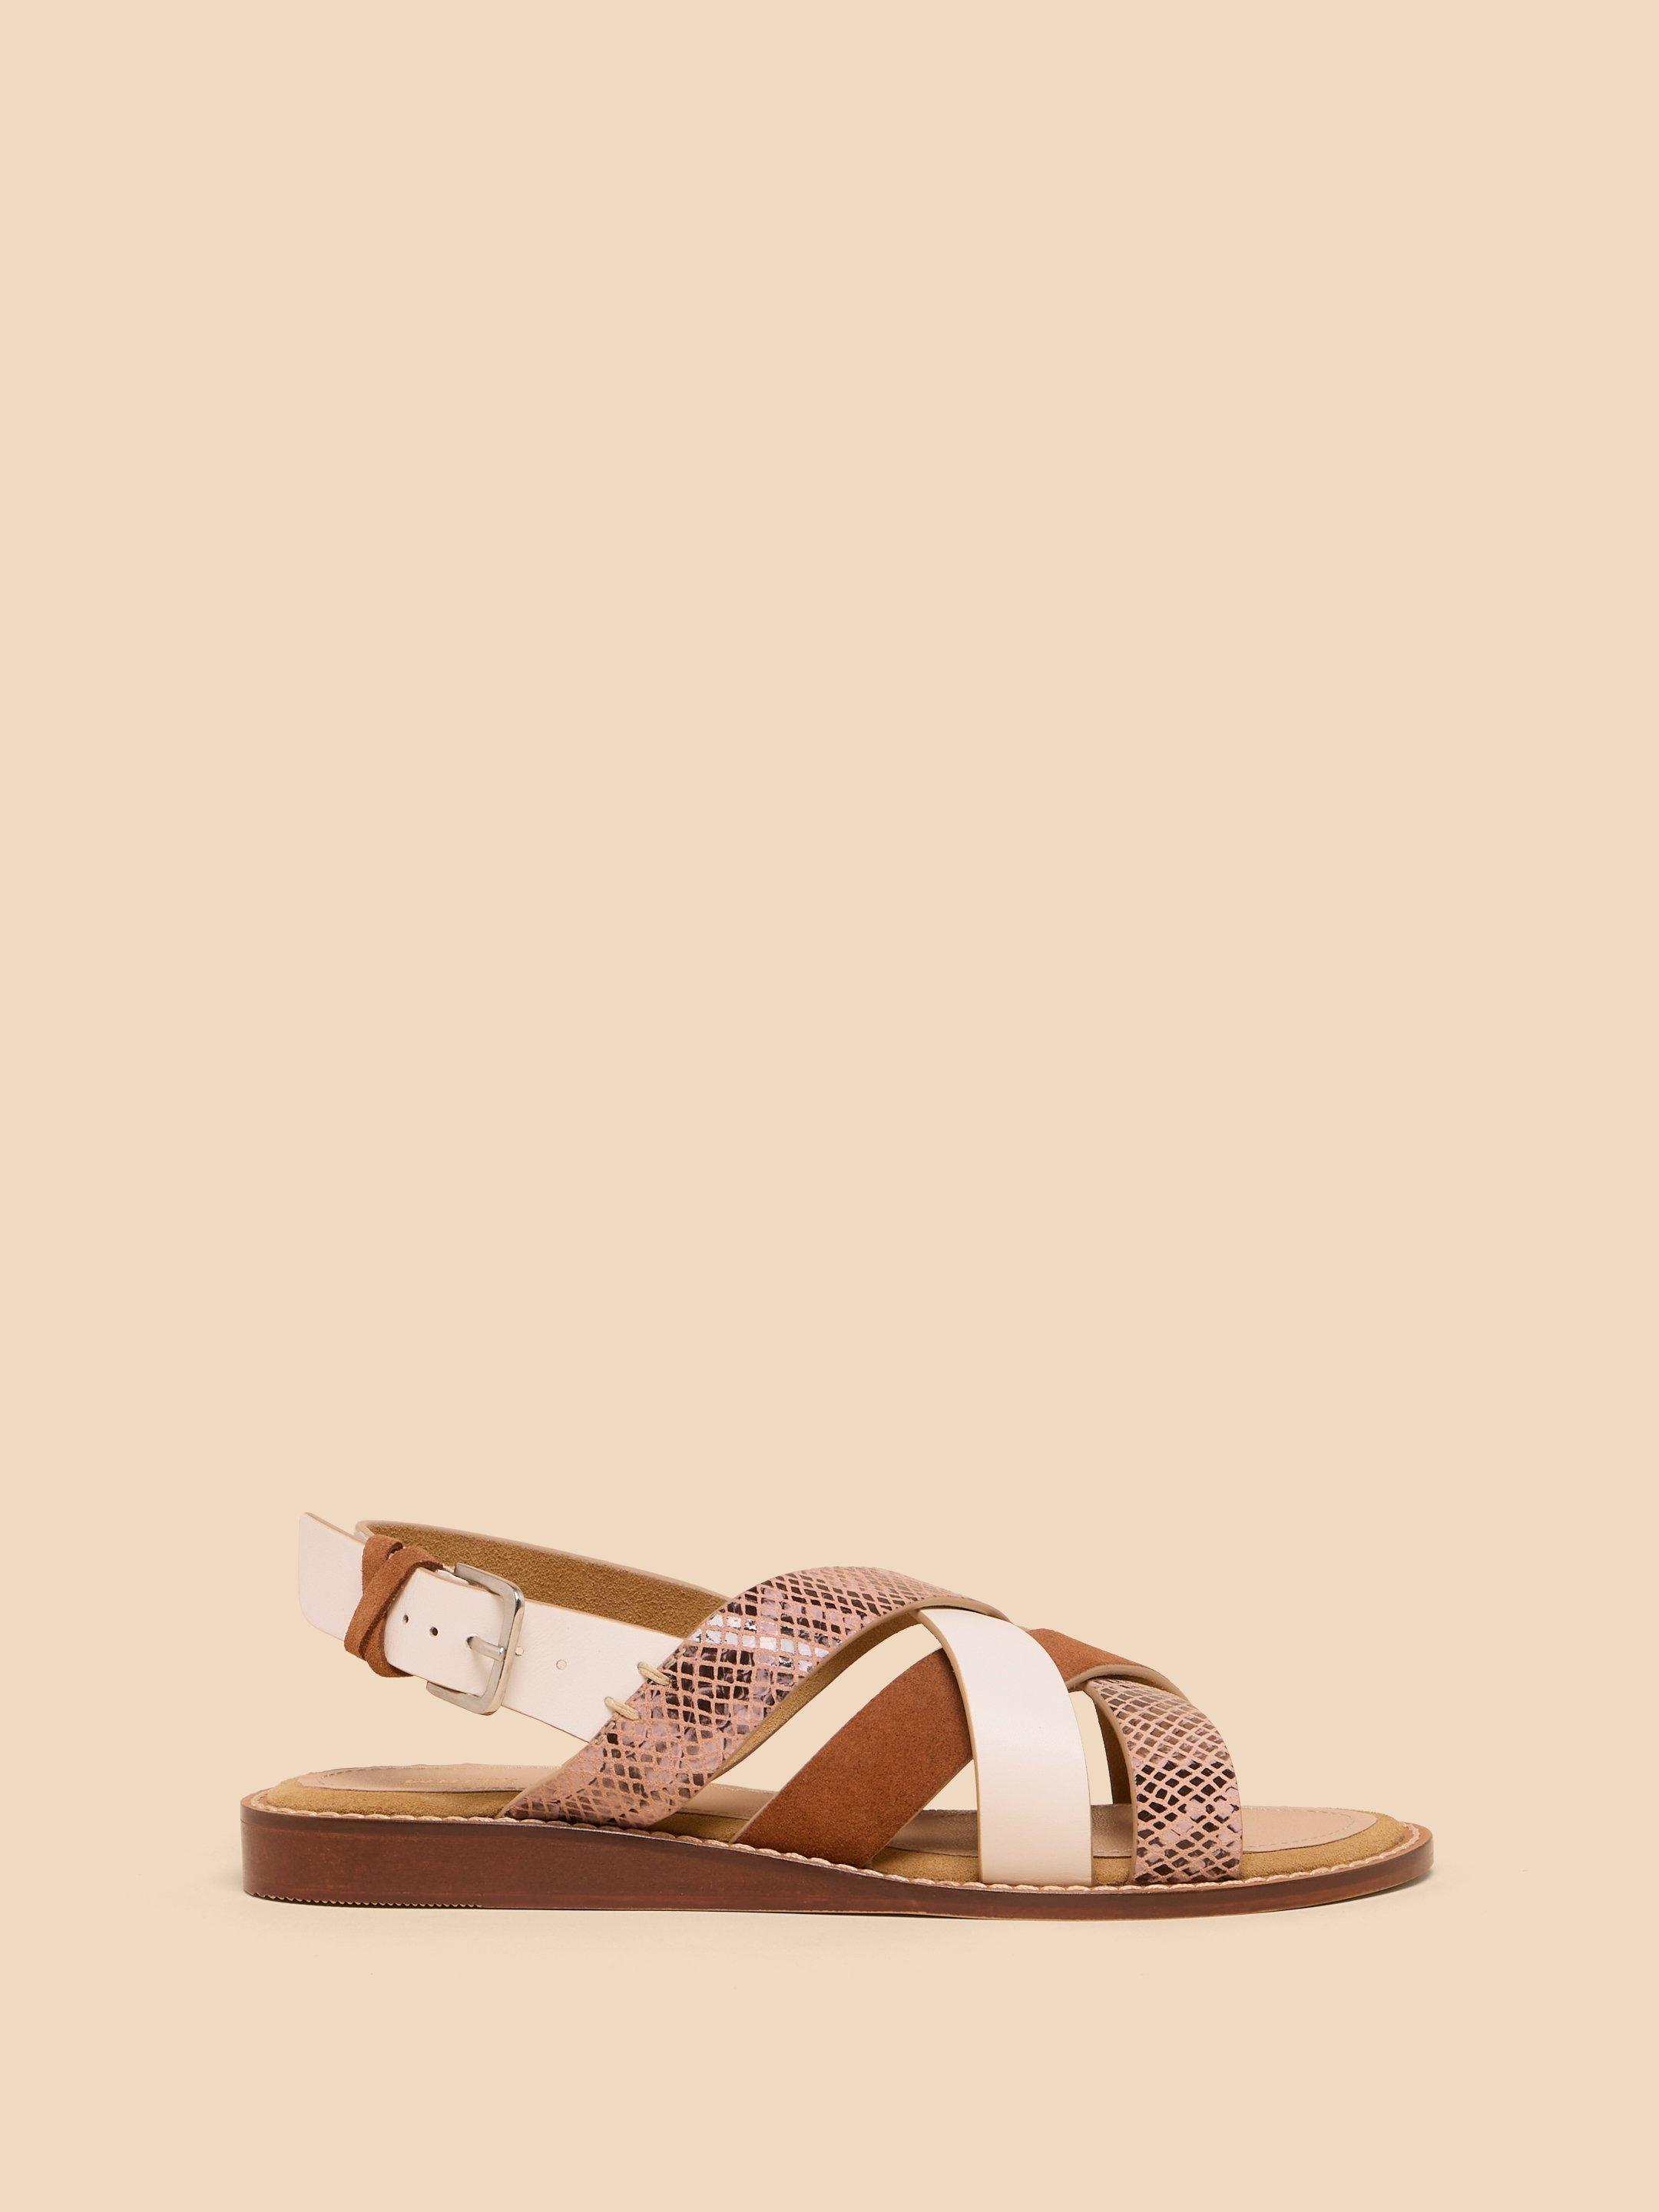 Holly Leather Mini Wedge in TAN MULTI - LIFESTYLE